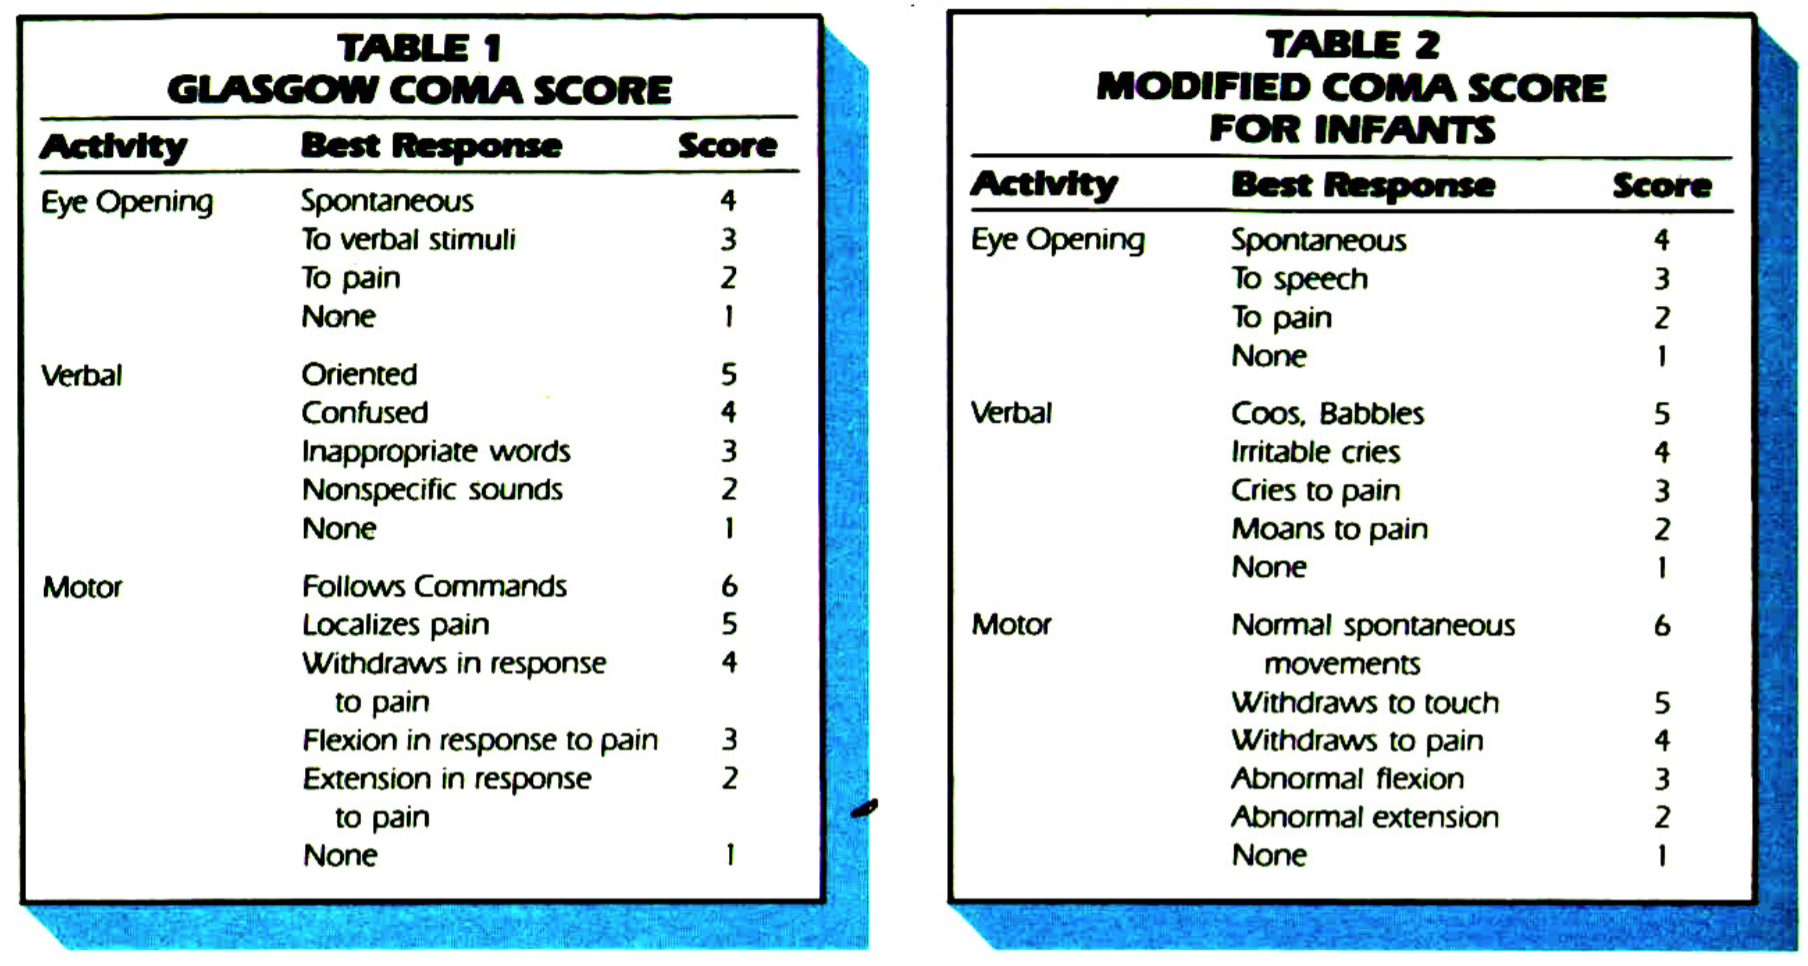 Glasgow coma scale criteria used by the 2009 PECARN study (source) 